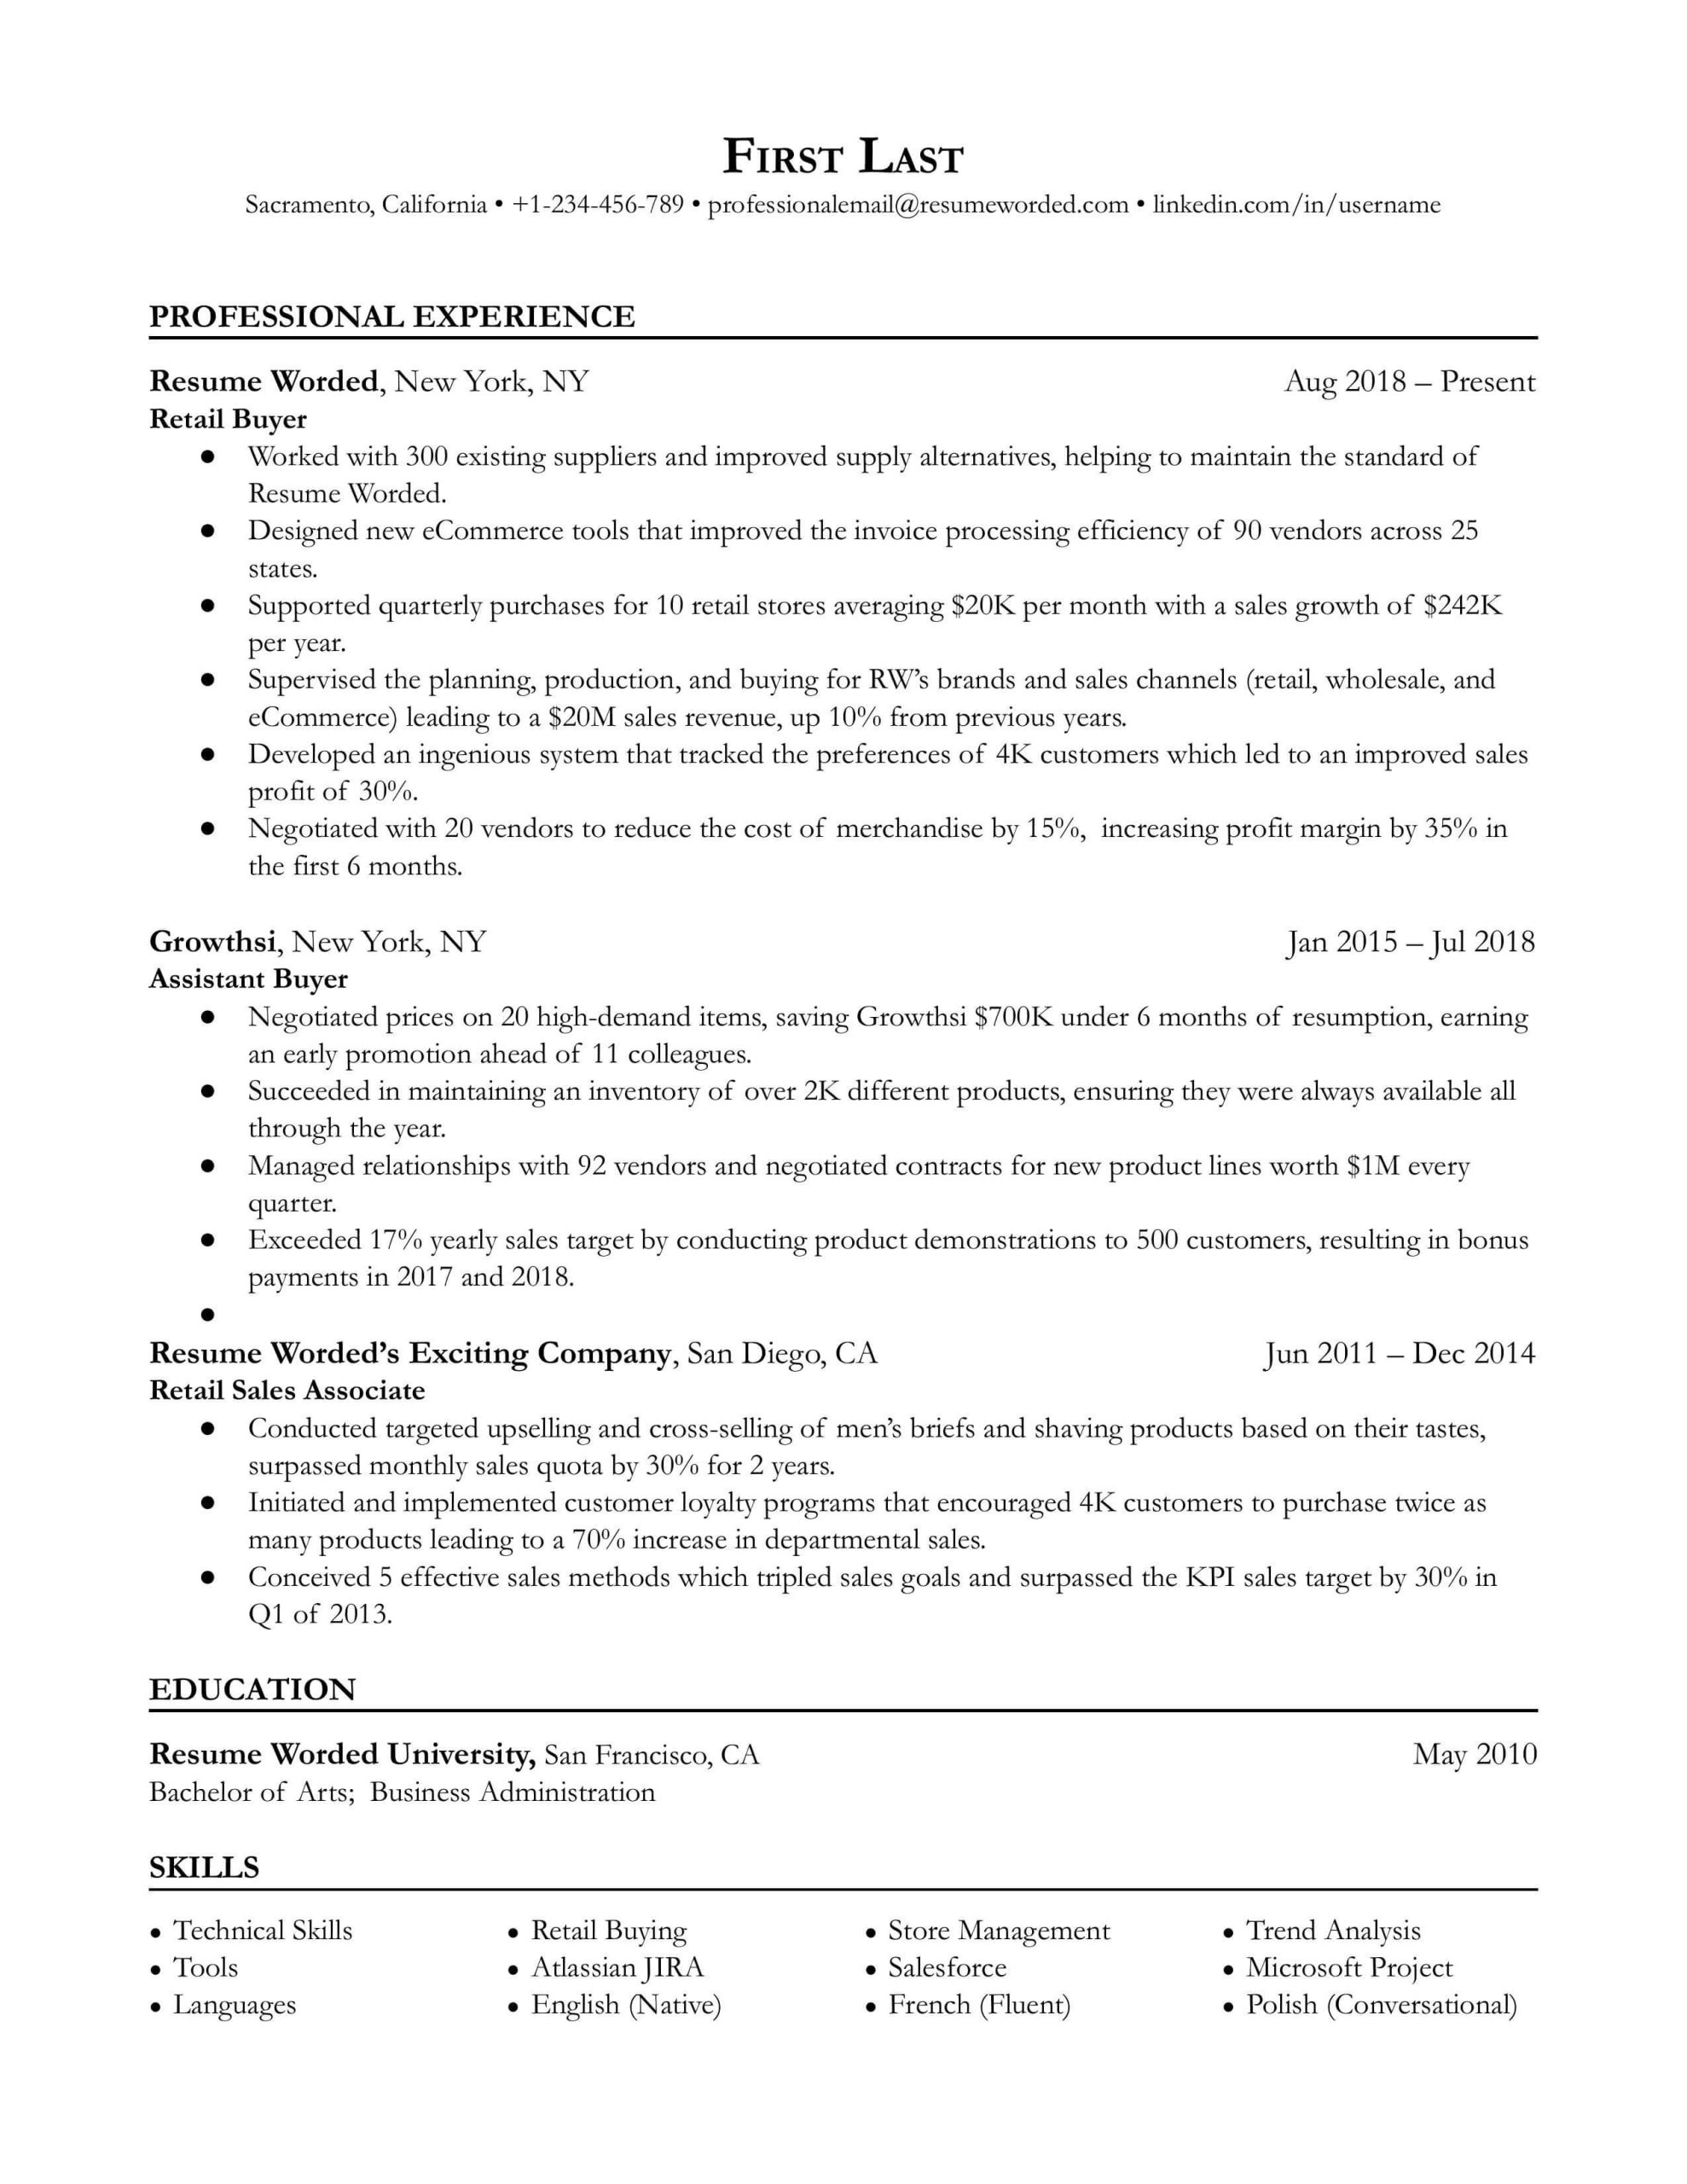 Sample Resume for A Retail Position 5 Retail Resume Examples for 2022 Resume Worded